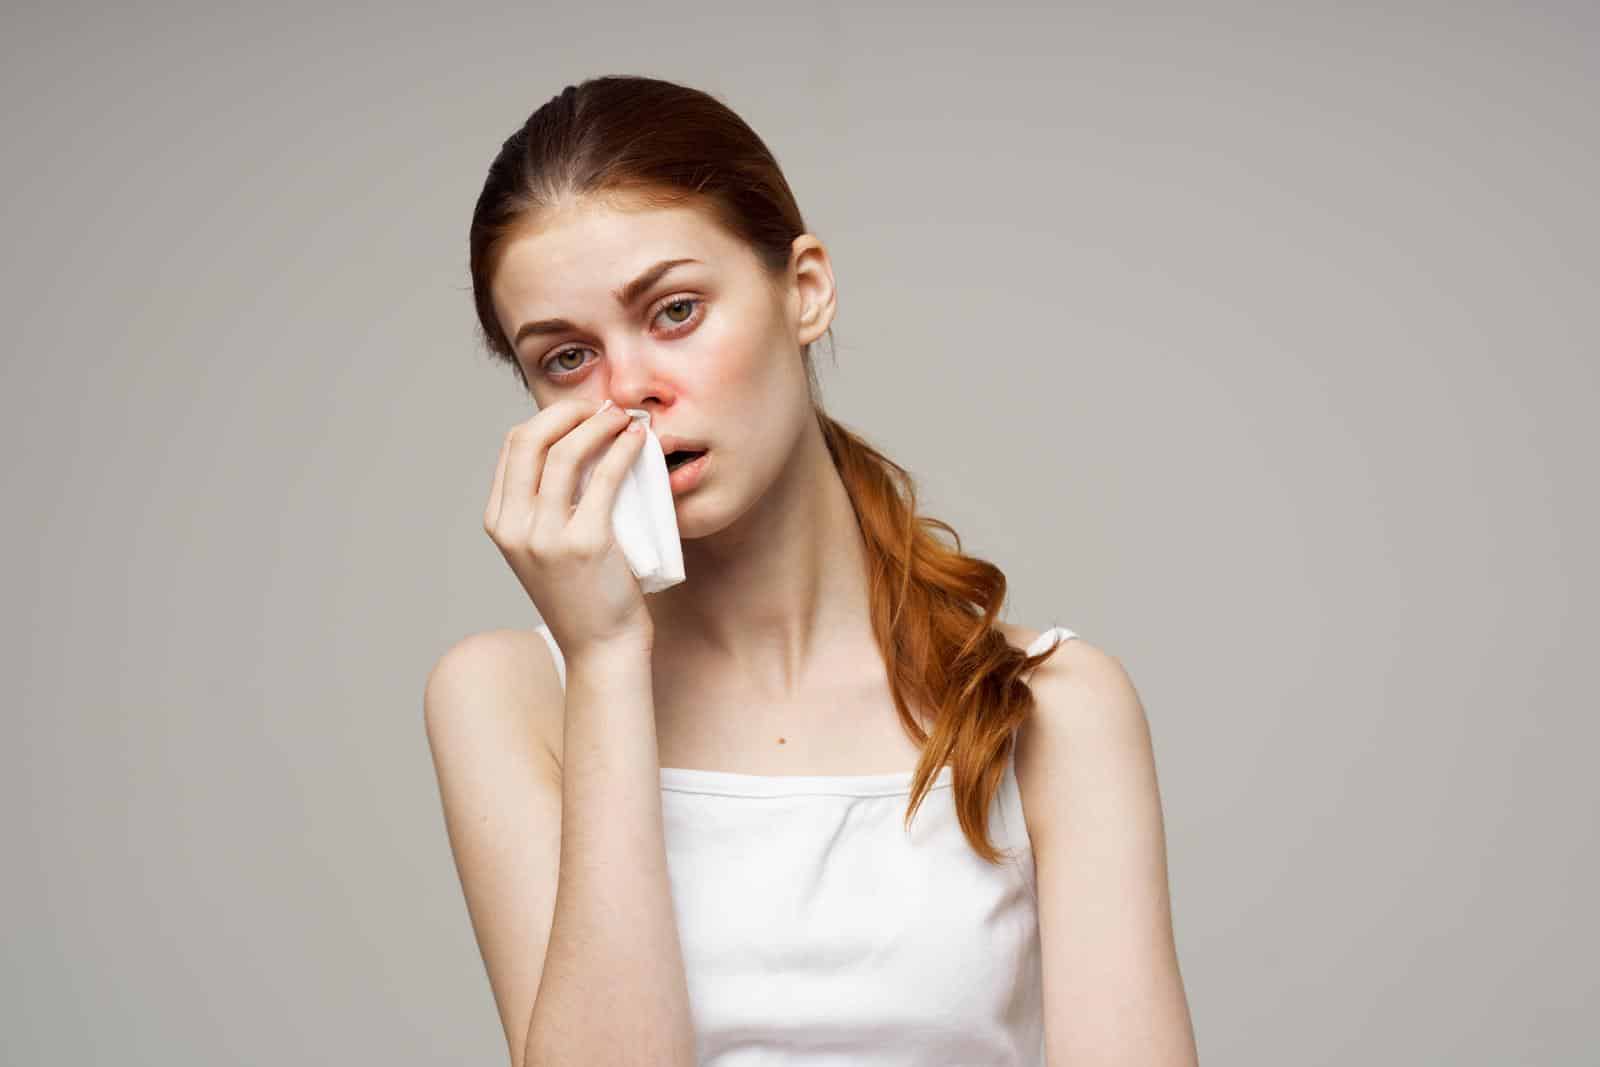 woman with allergy holding tissue. Heat pumps and allergies